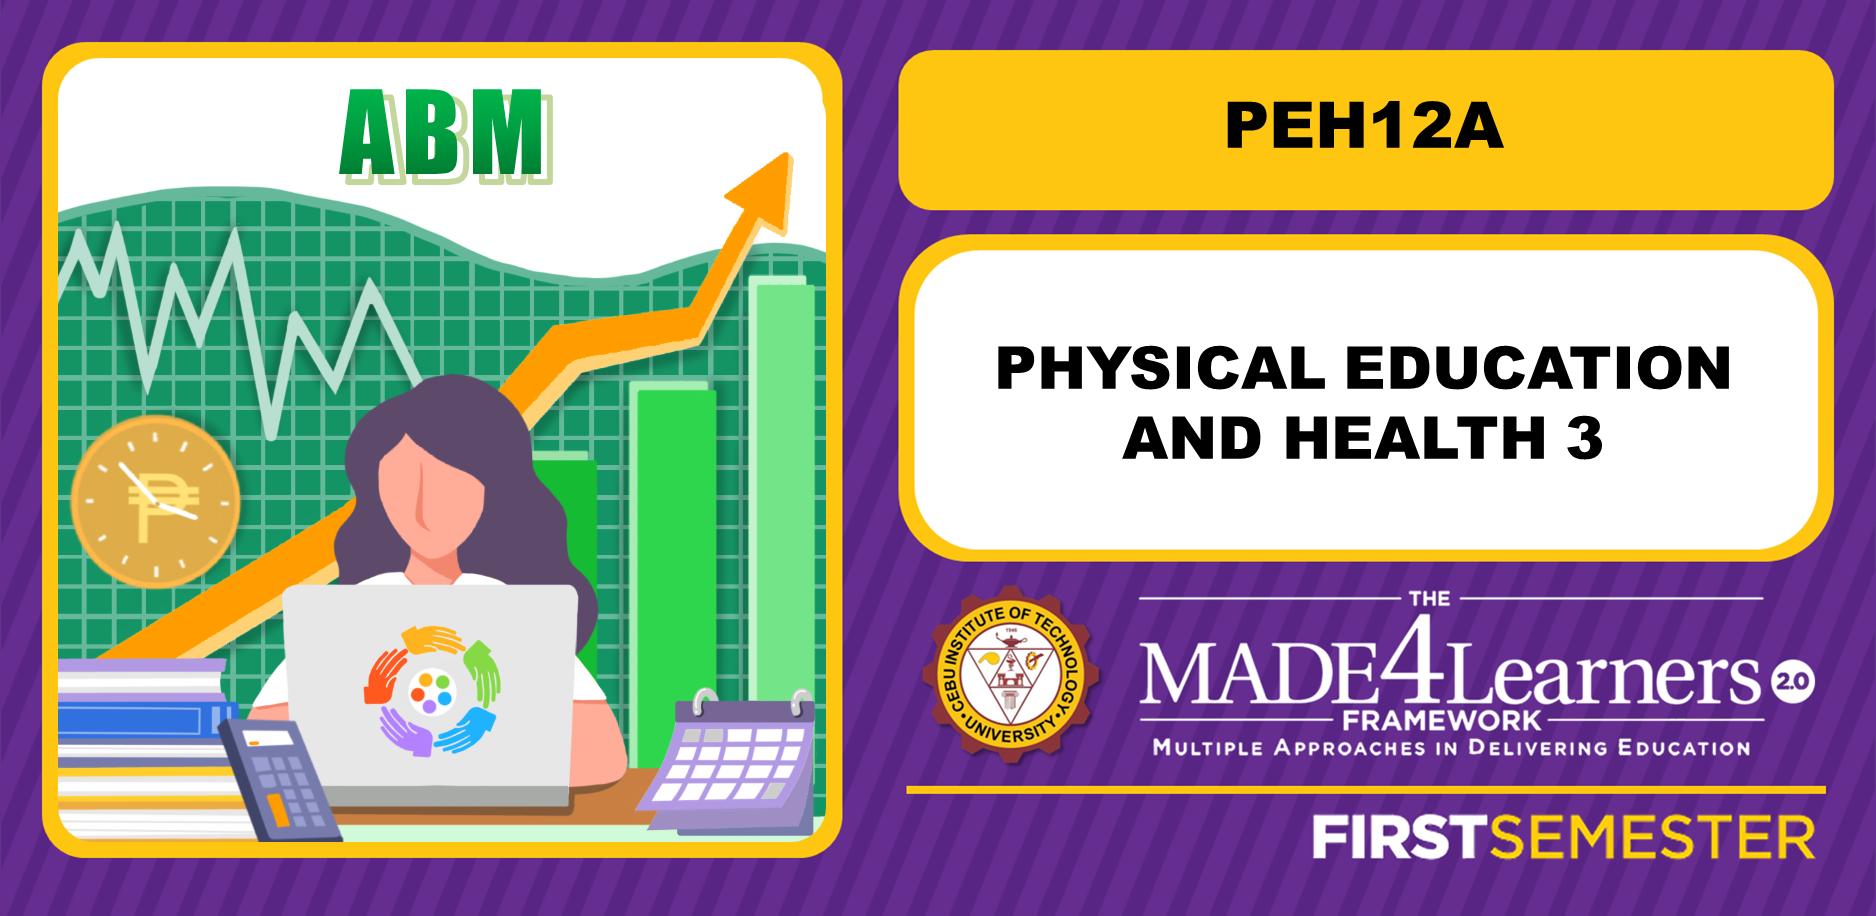 PEH12A: Physical Education and Health 3 (ABM)